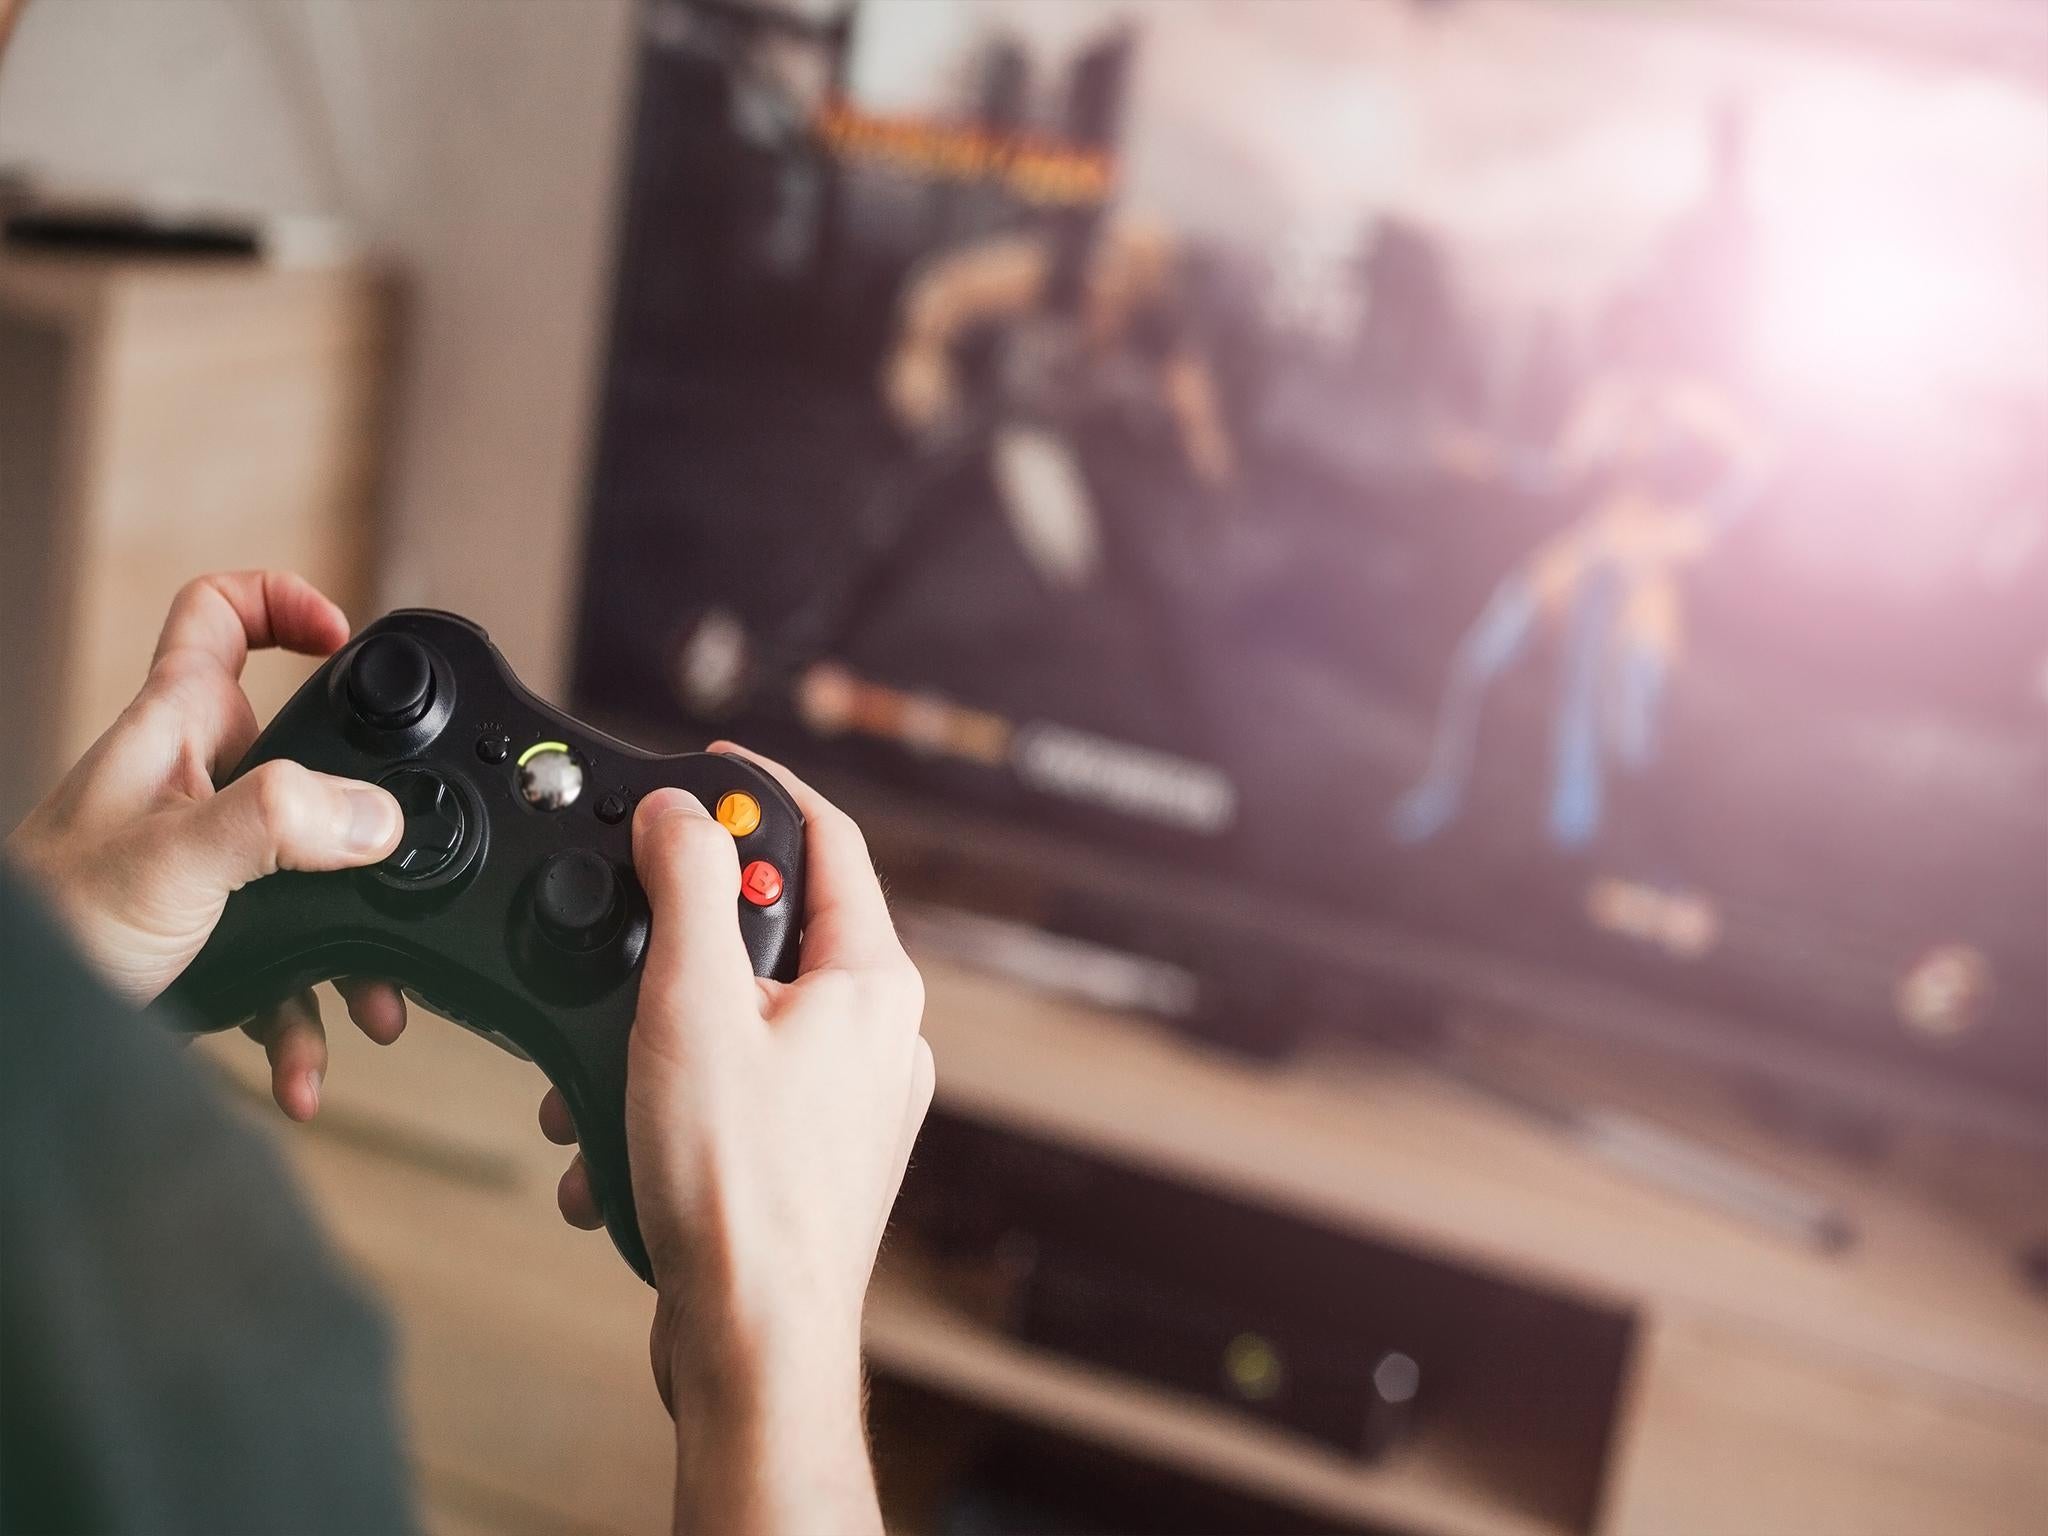 Thirty-one per cent of respondents said a gaming console was an opulent purchase